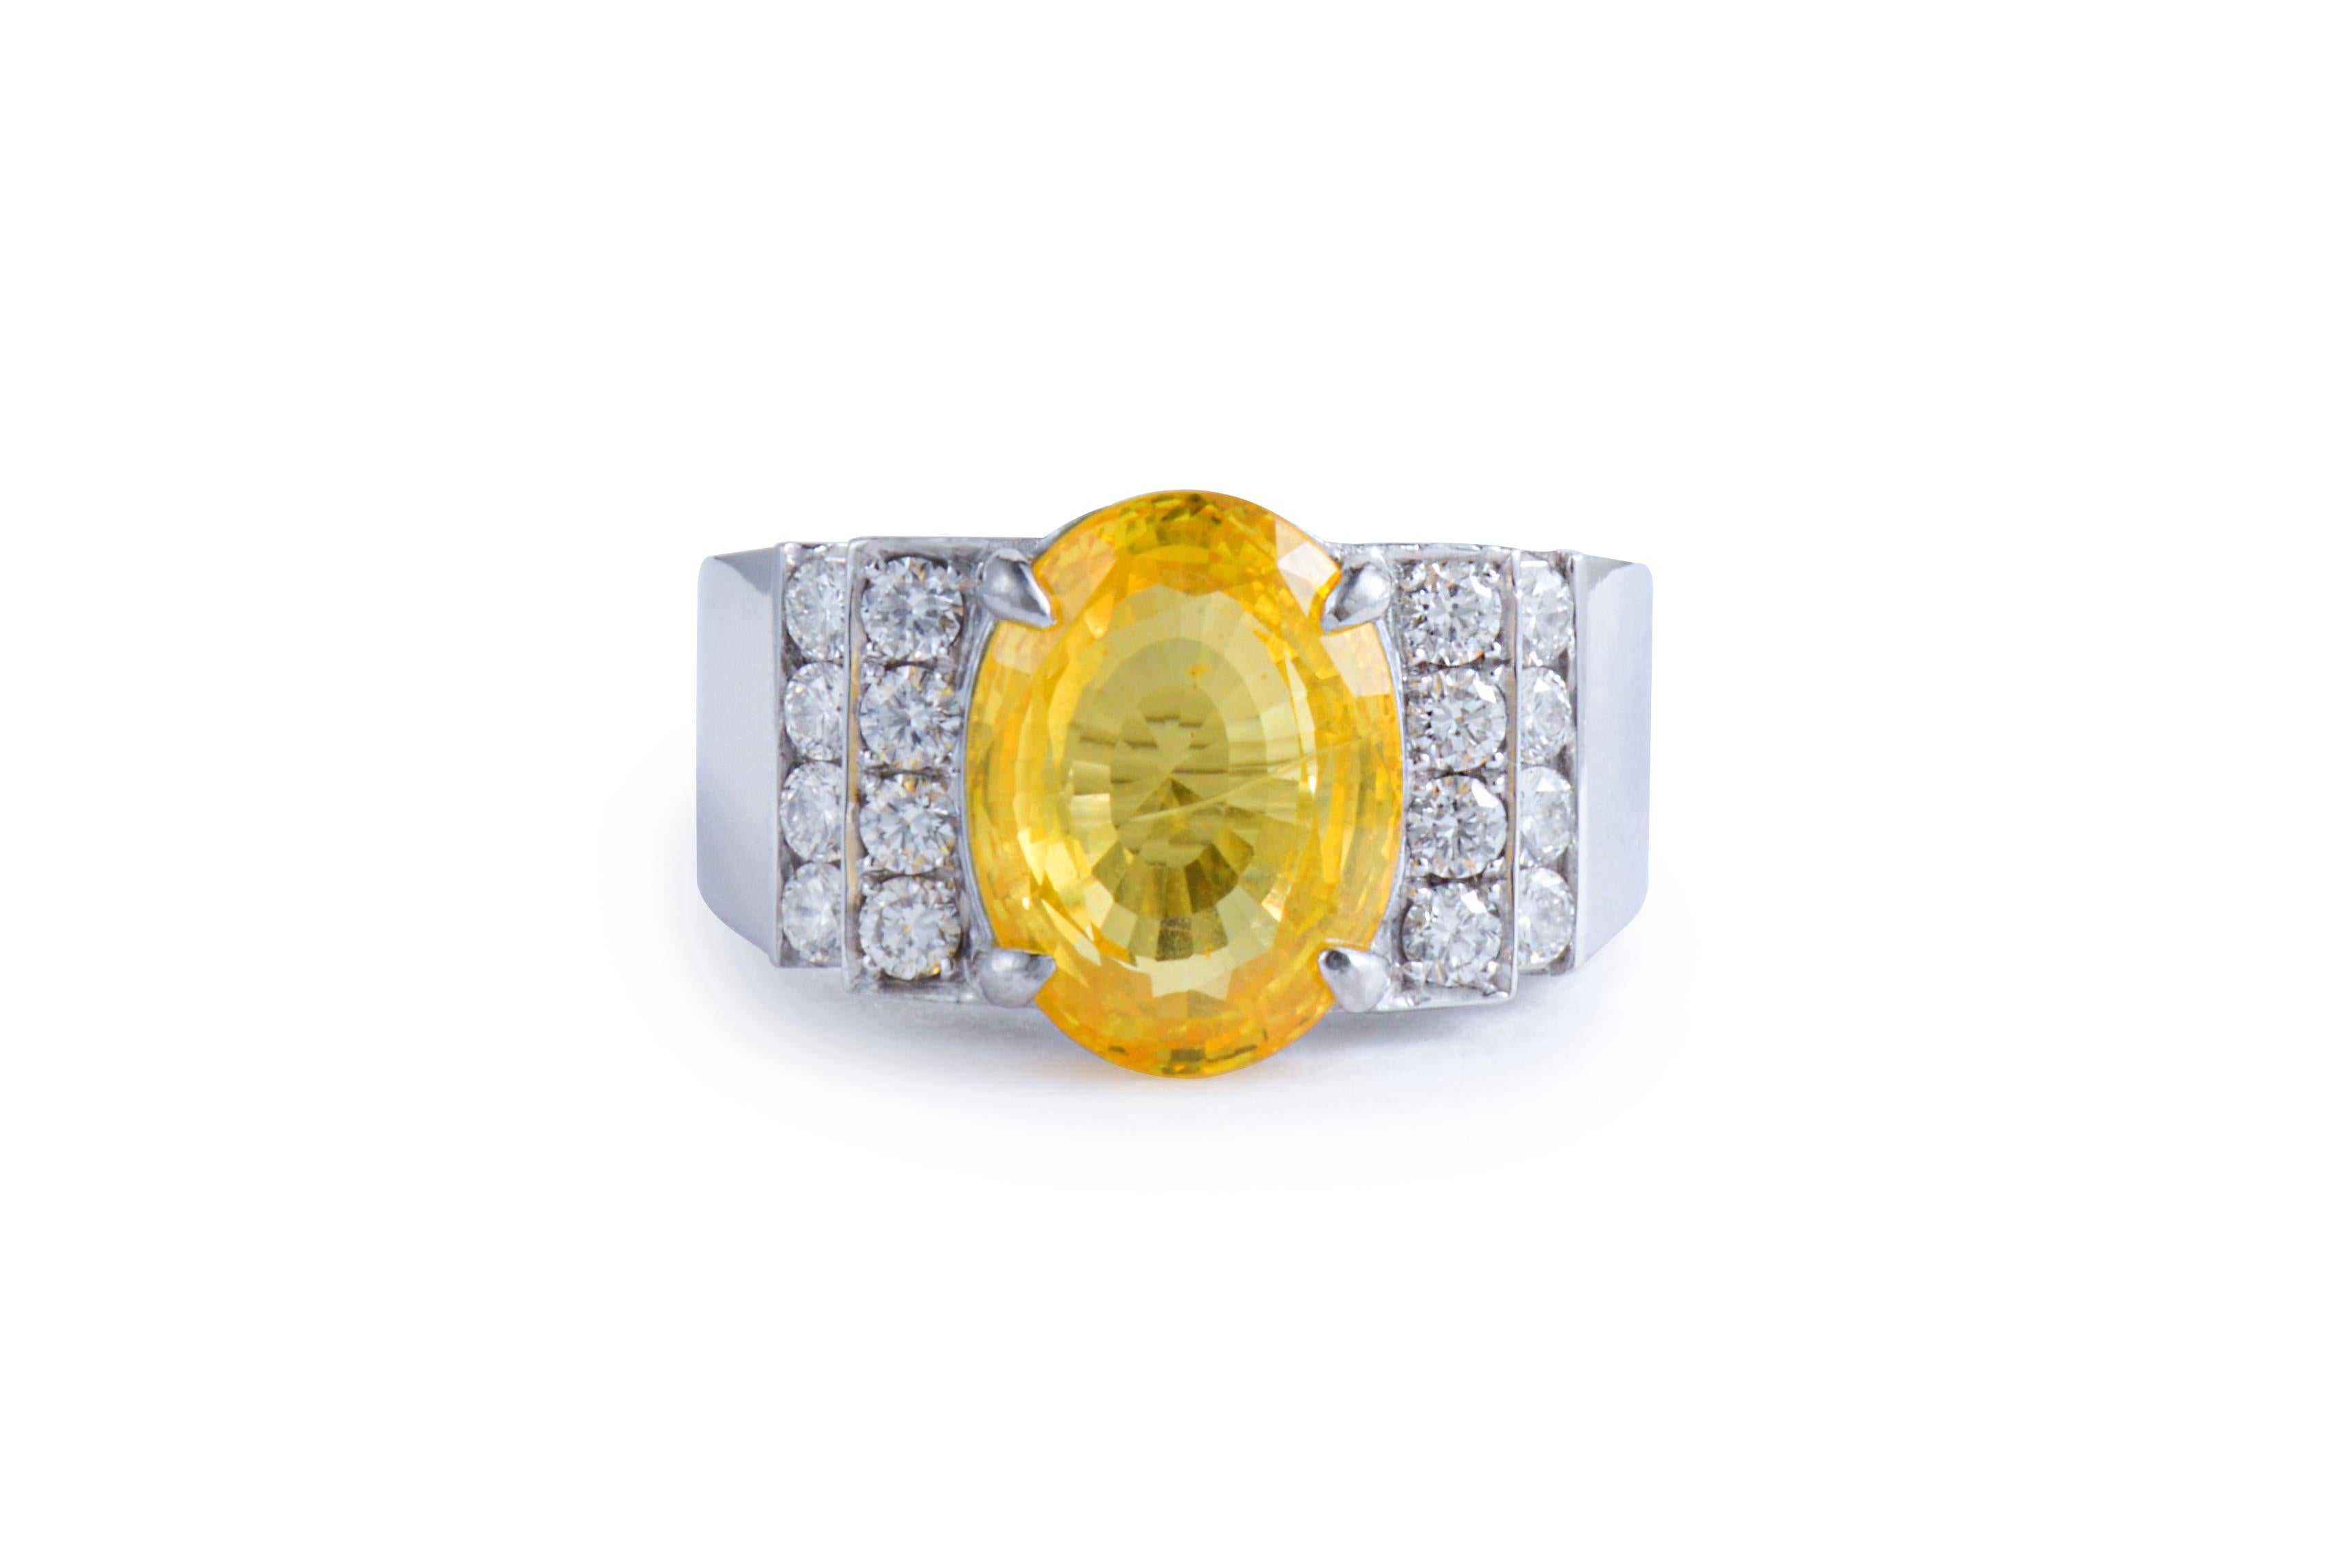 *IGI PT950 9.54 Ct Unheated Yellow Sapphire Antique Art Deco Engagement Ring*
IGI-certified natural unheated yellow sapphire as the center stone weighing 9.54 ct surrounded by the FG VS accent diamonds weighing 1.20 ct on the PT950 platinum gold